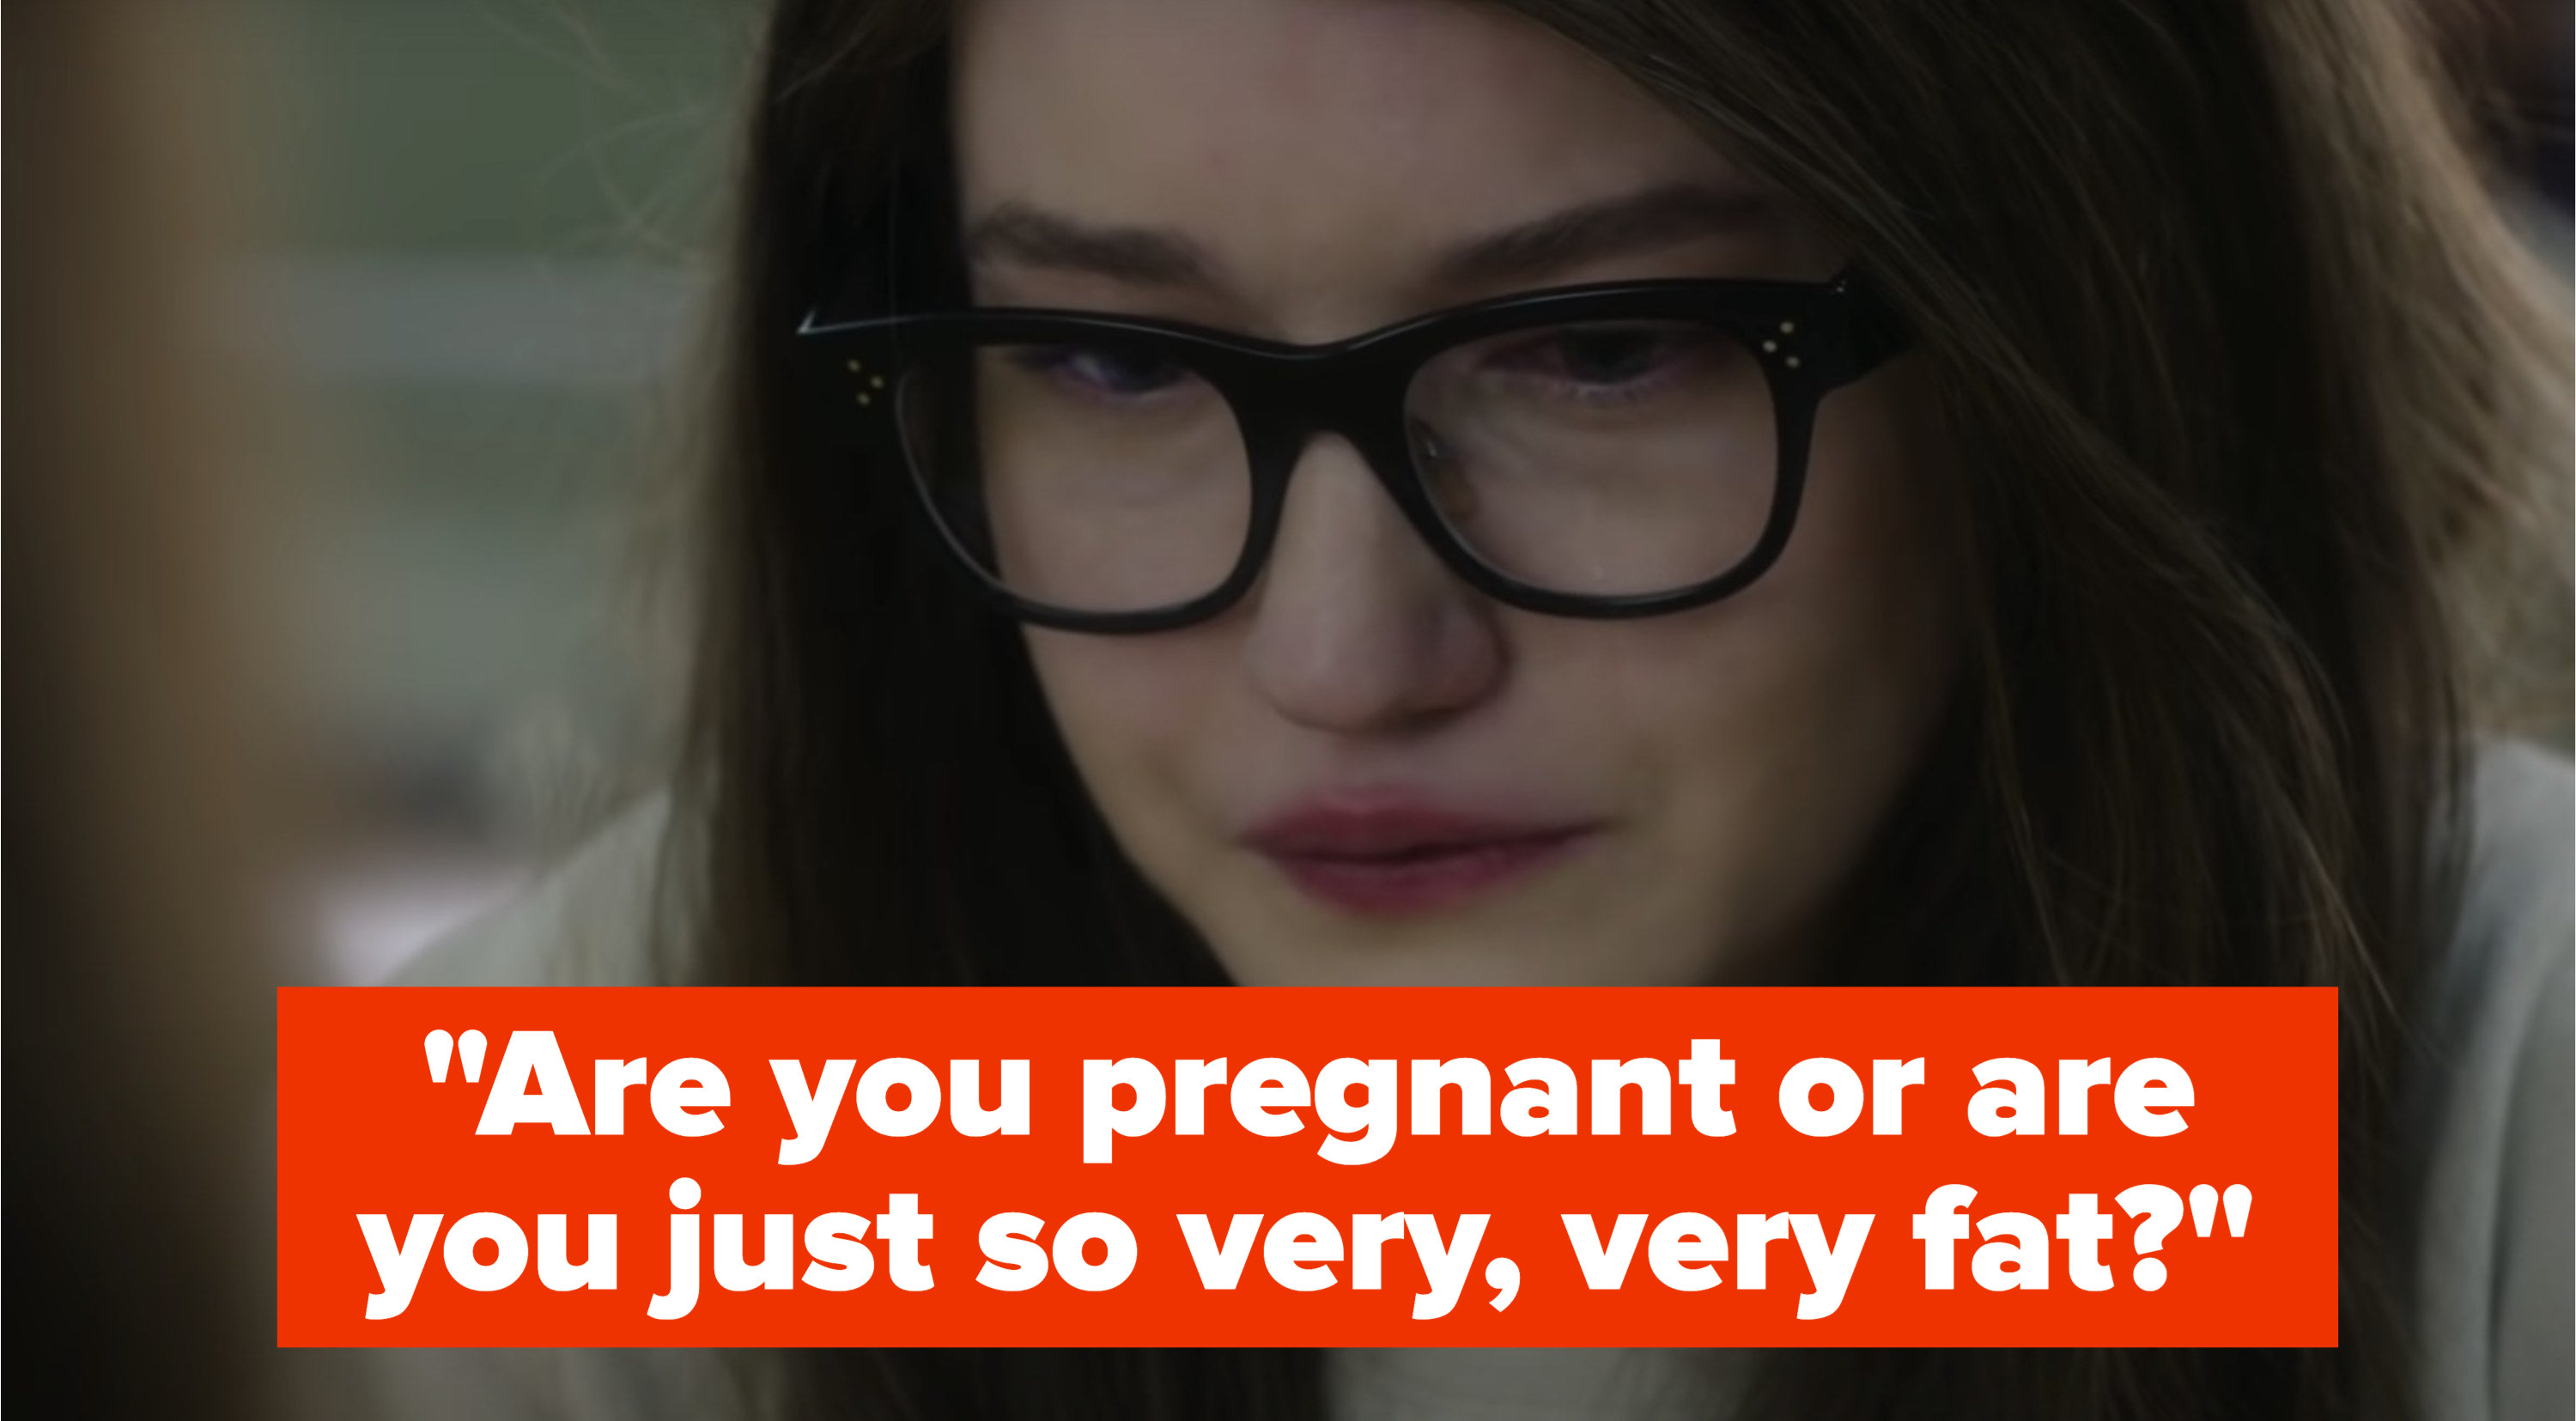 Anna says, &quot;Are you pregnant or are you just so very, very fat?&quot;